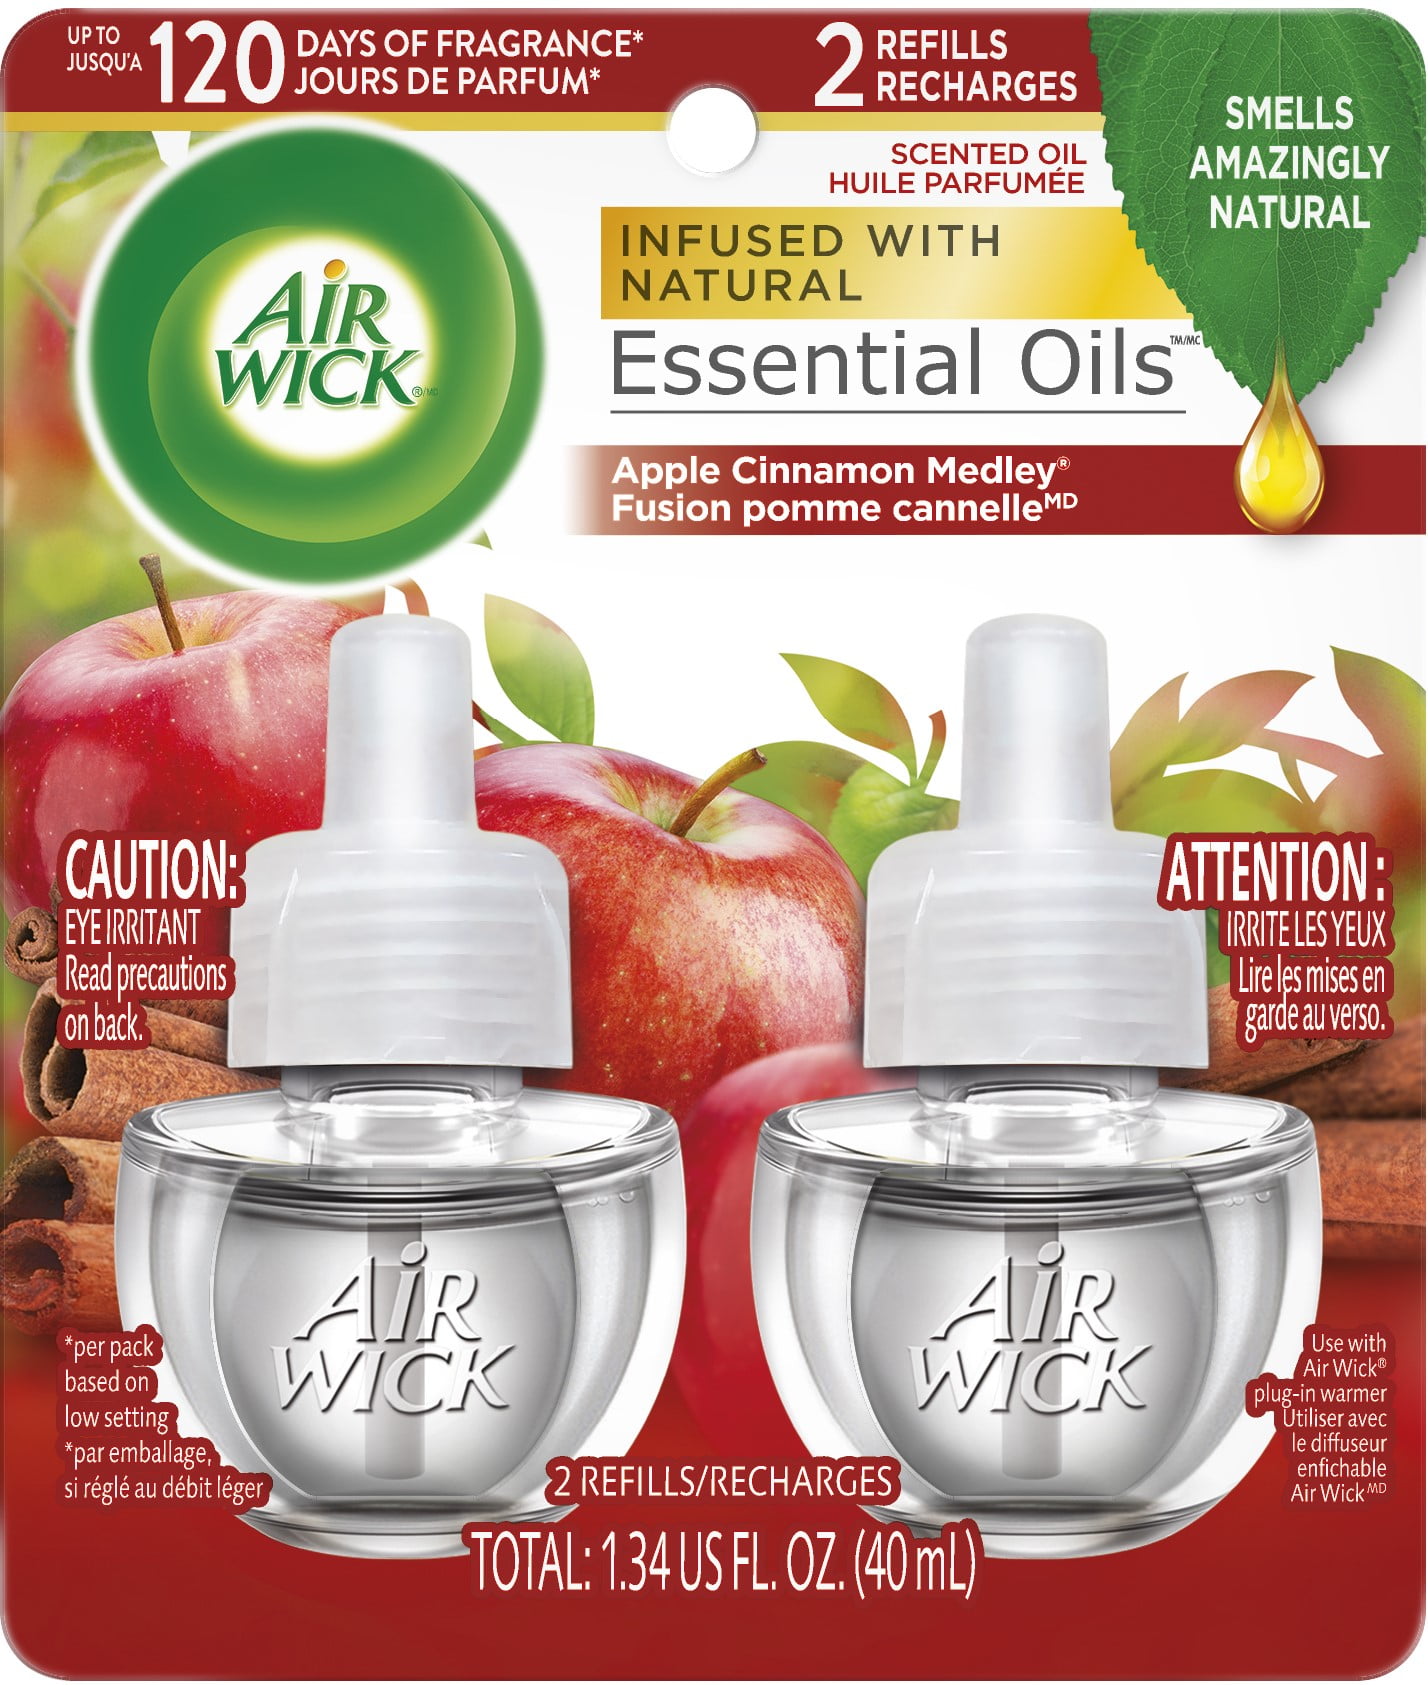 Details about   E Airwick Limited Edition Diffuser Refill  Apple Cinnamon Medley Essential Oil 